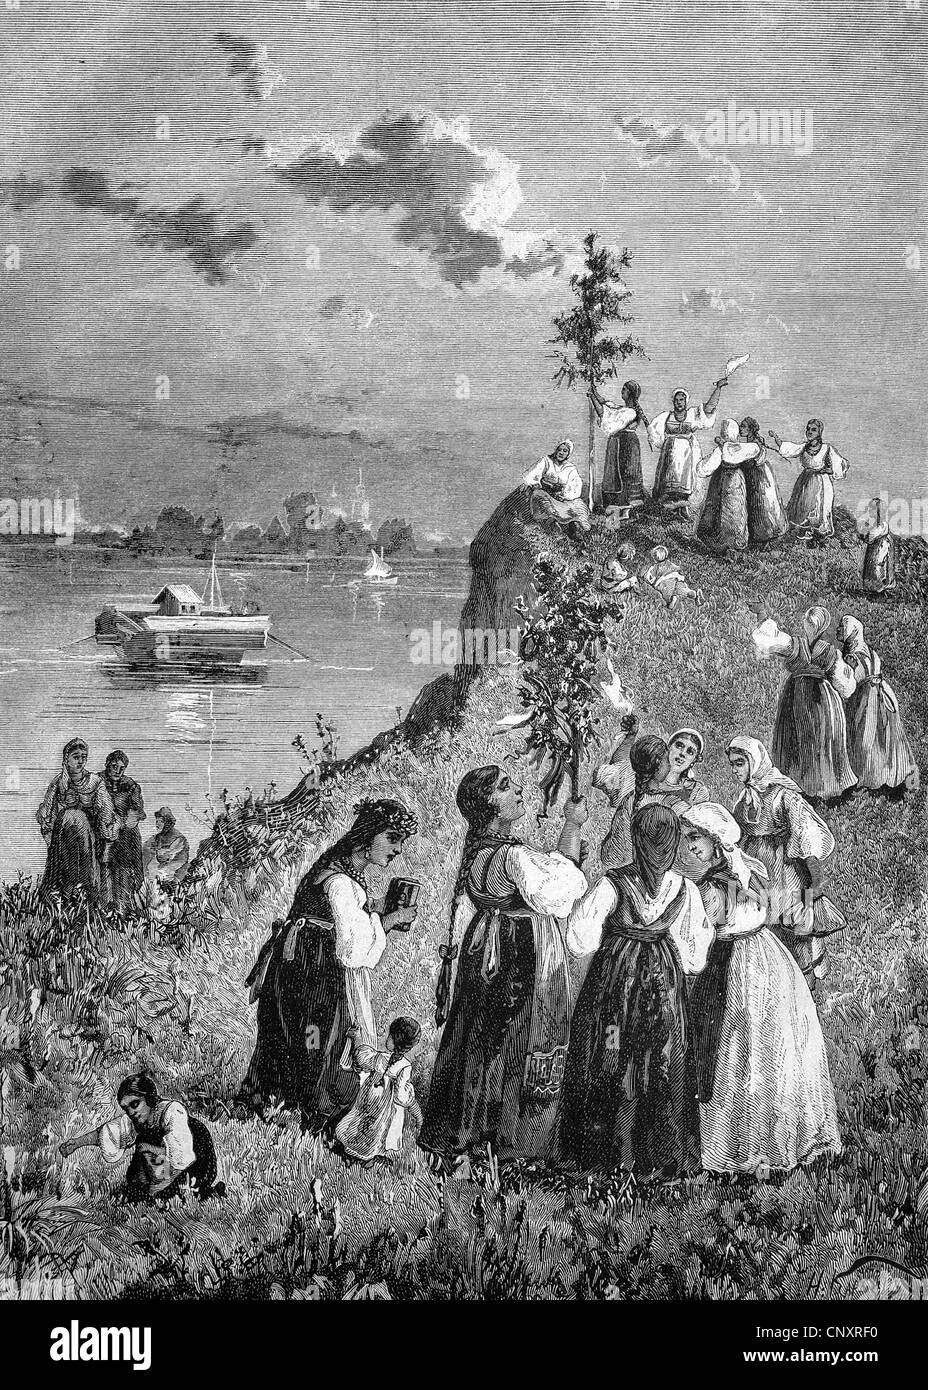 Semik festival in Russia, historical engraving, about 1888 Stock Photo